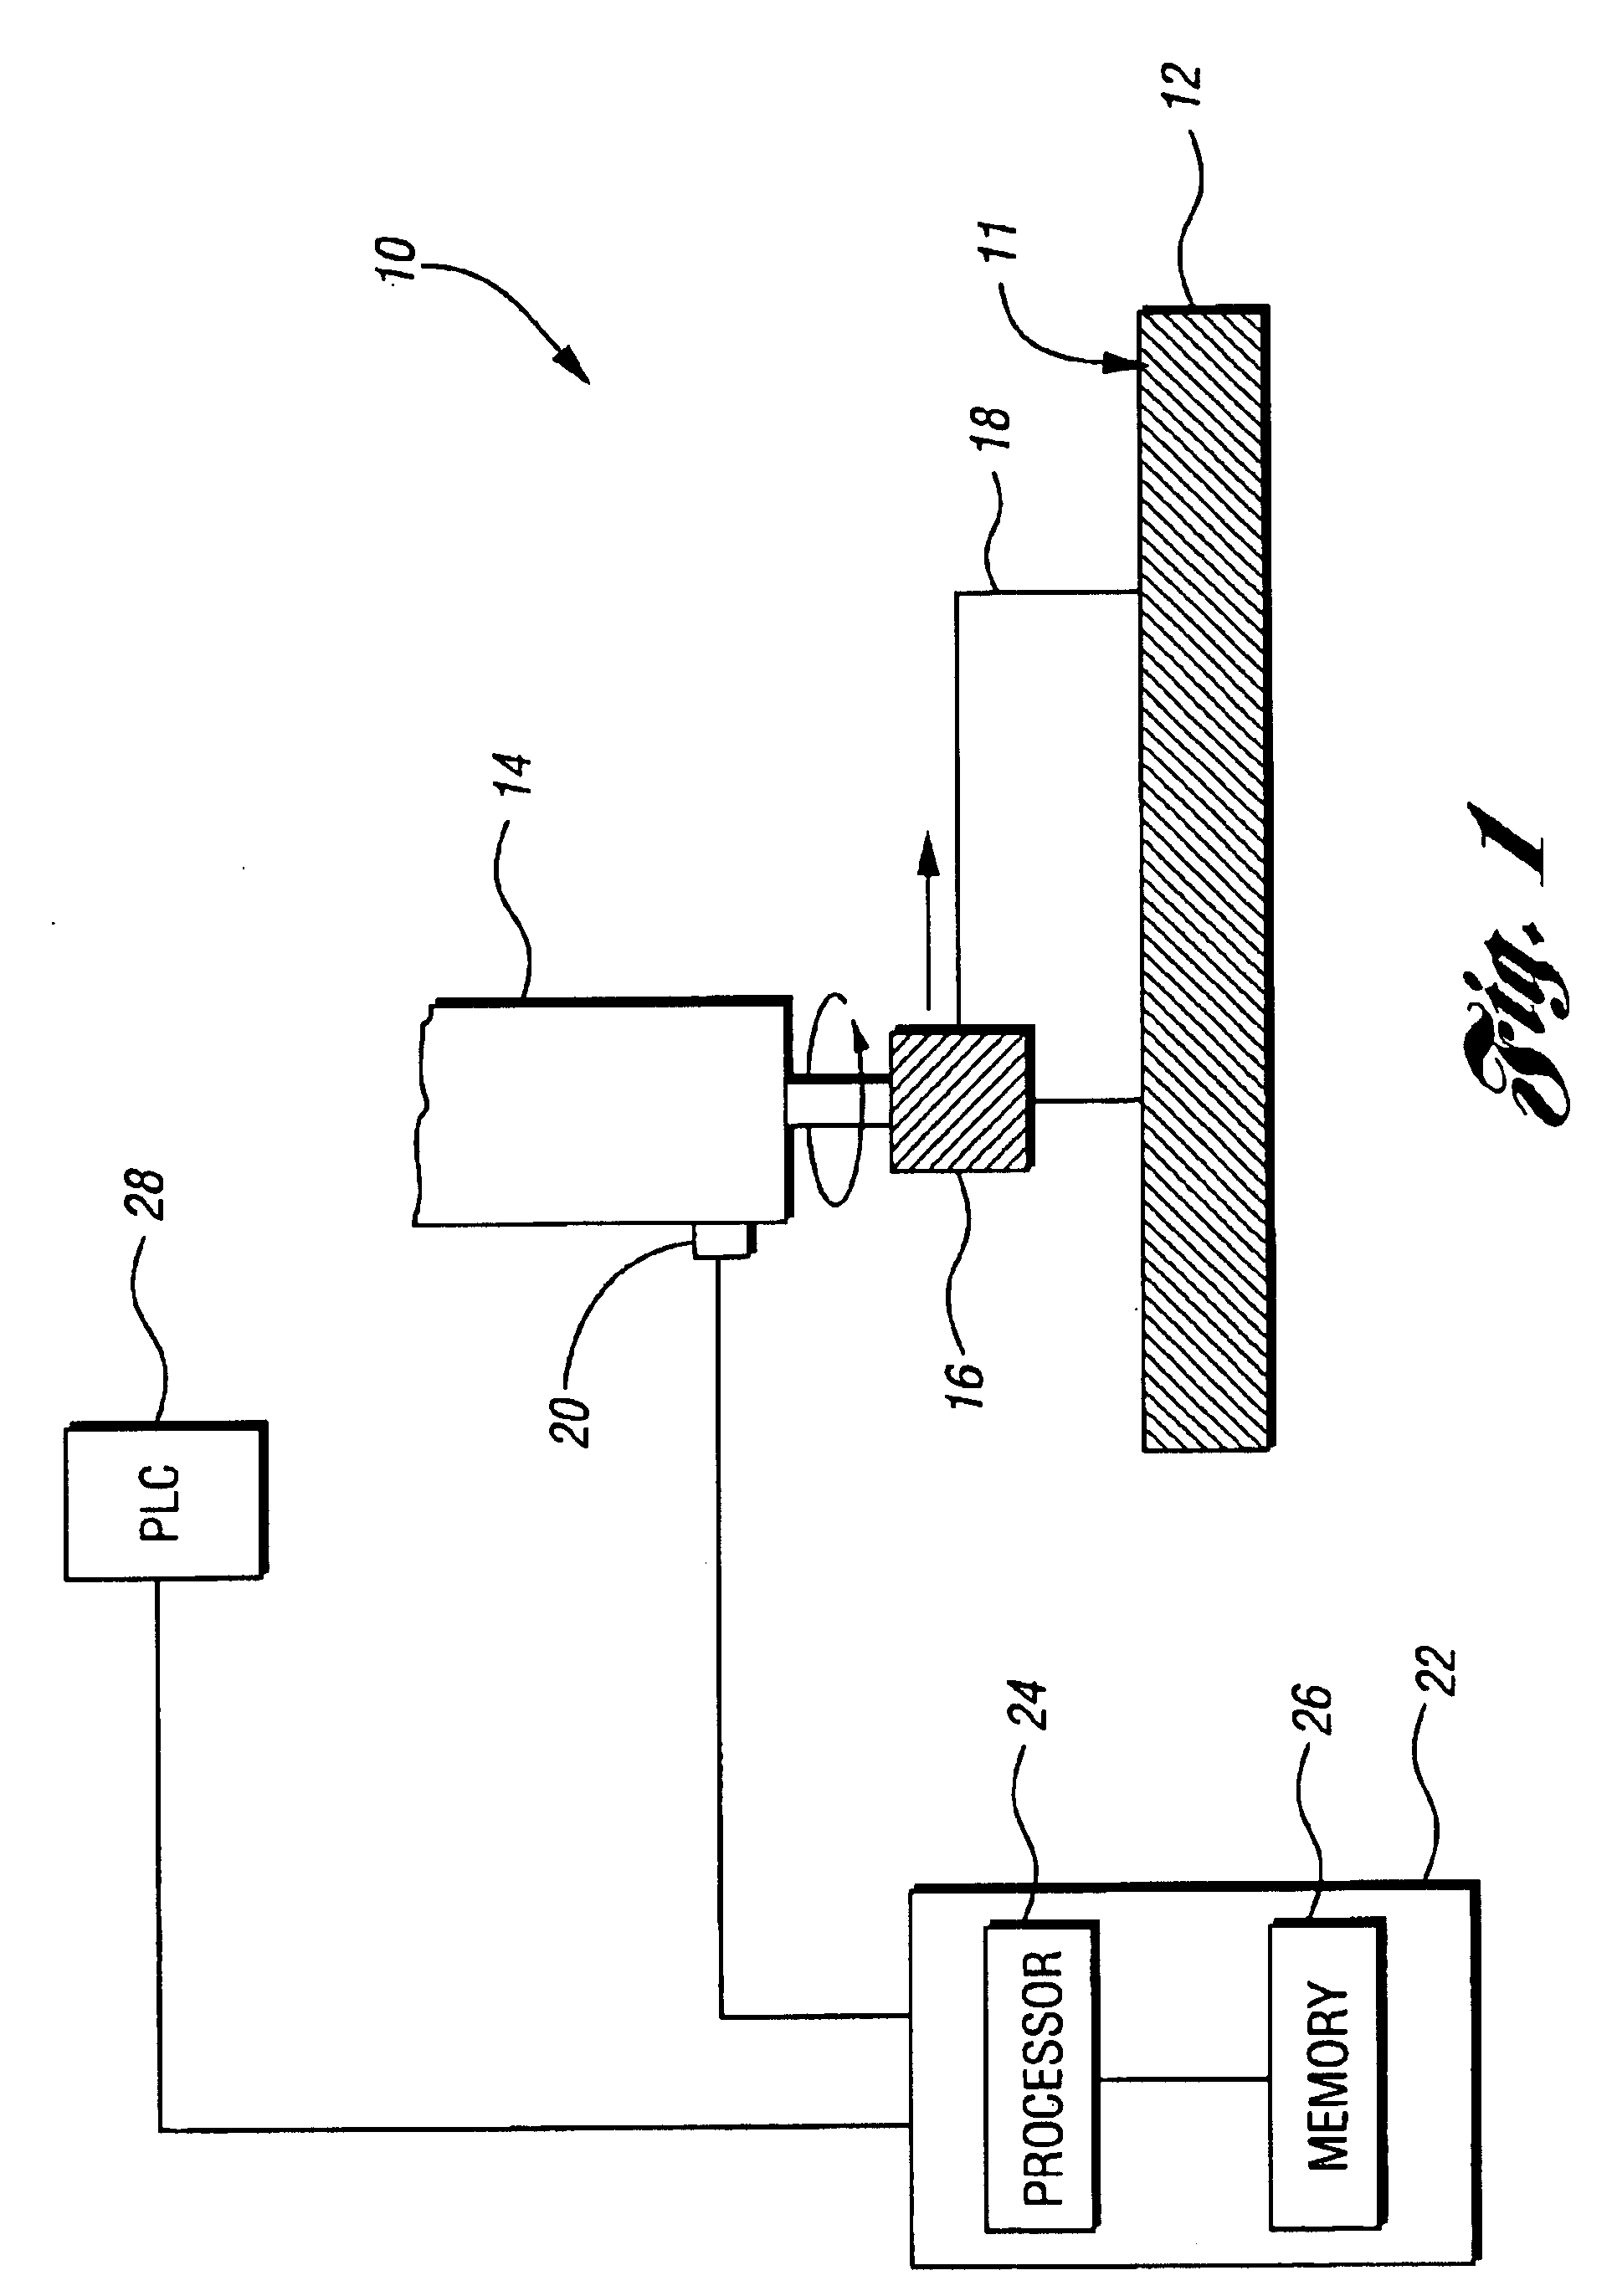 System and method for machining data management